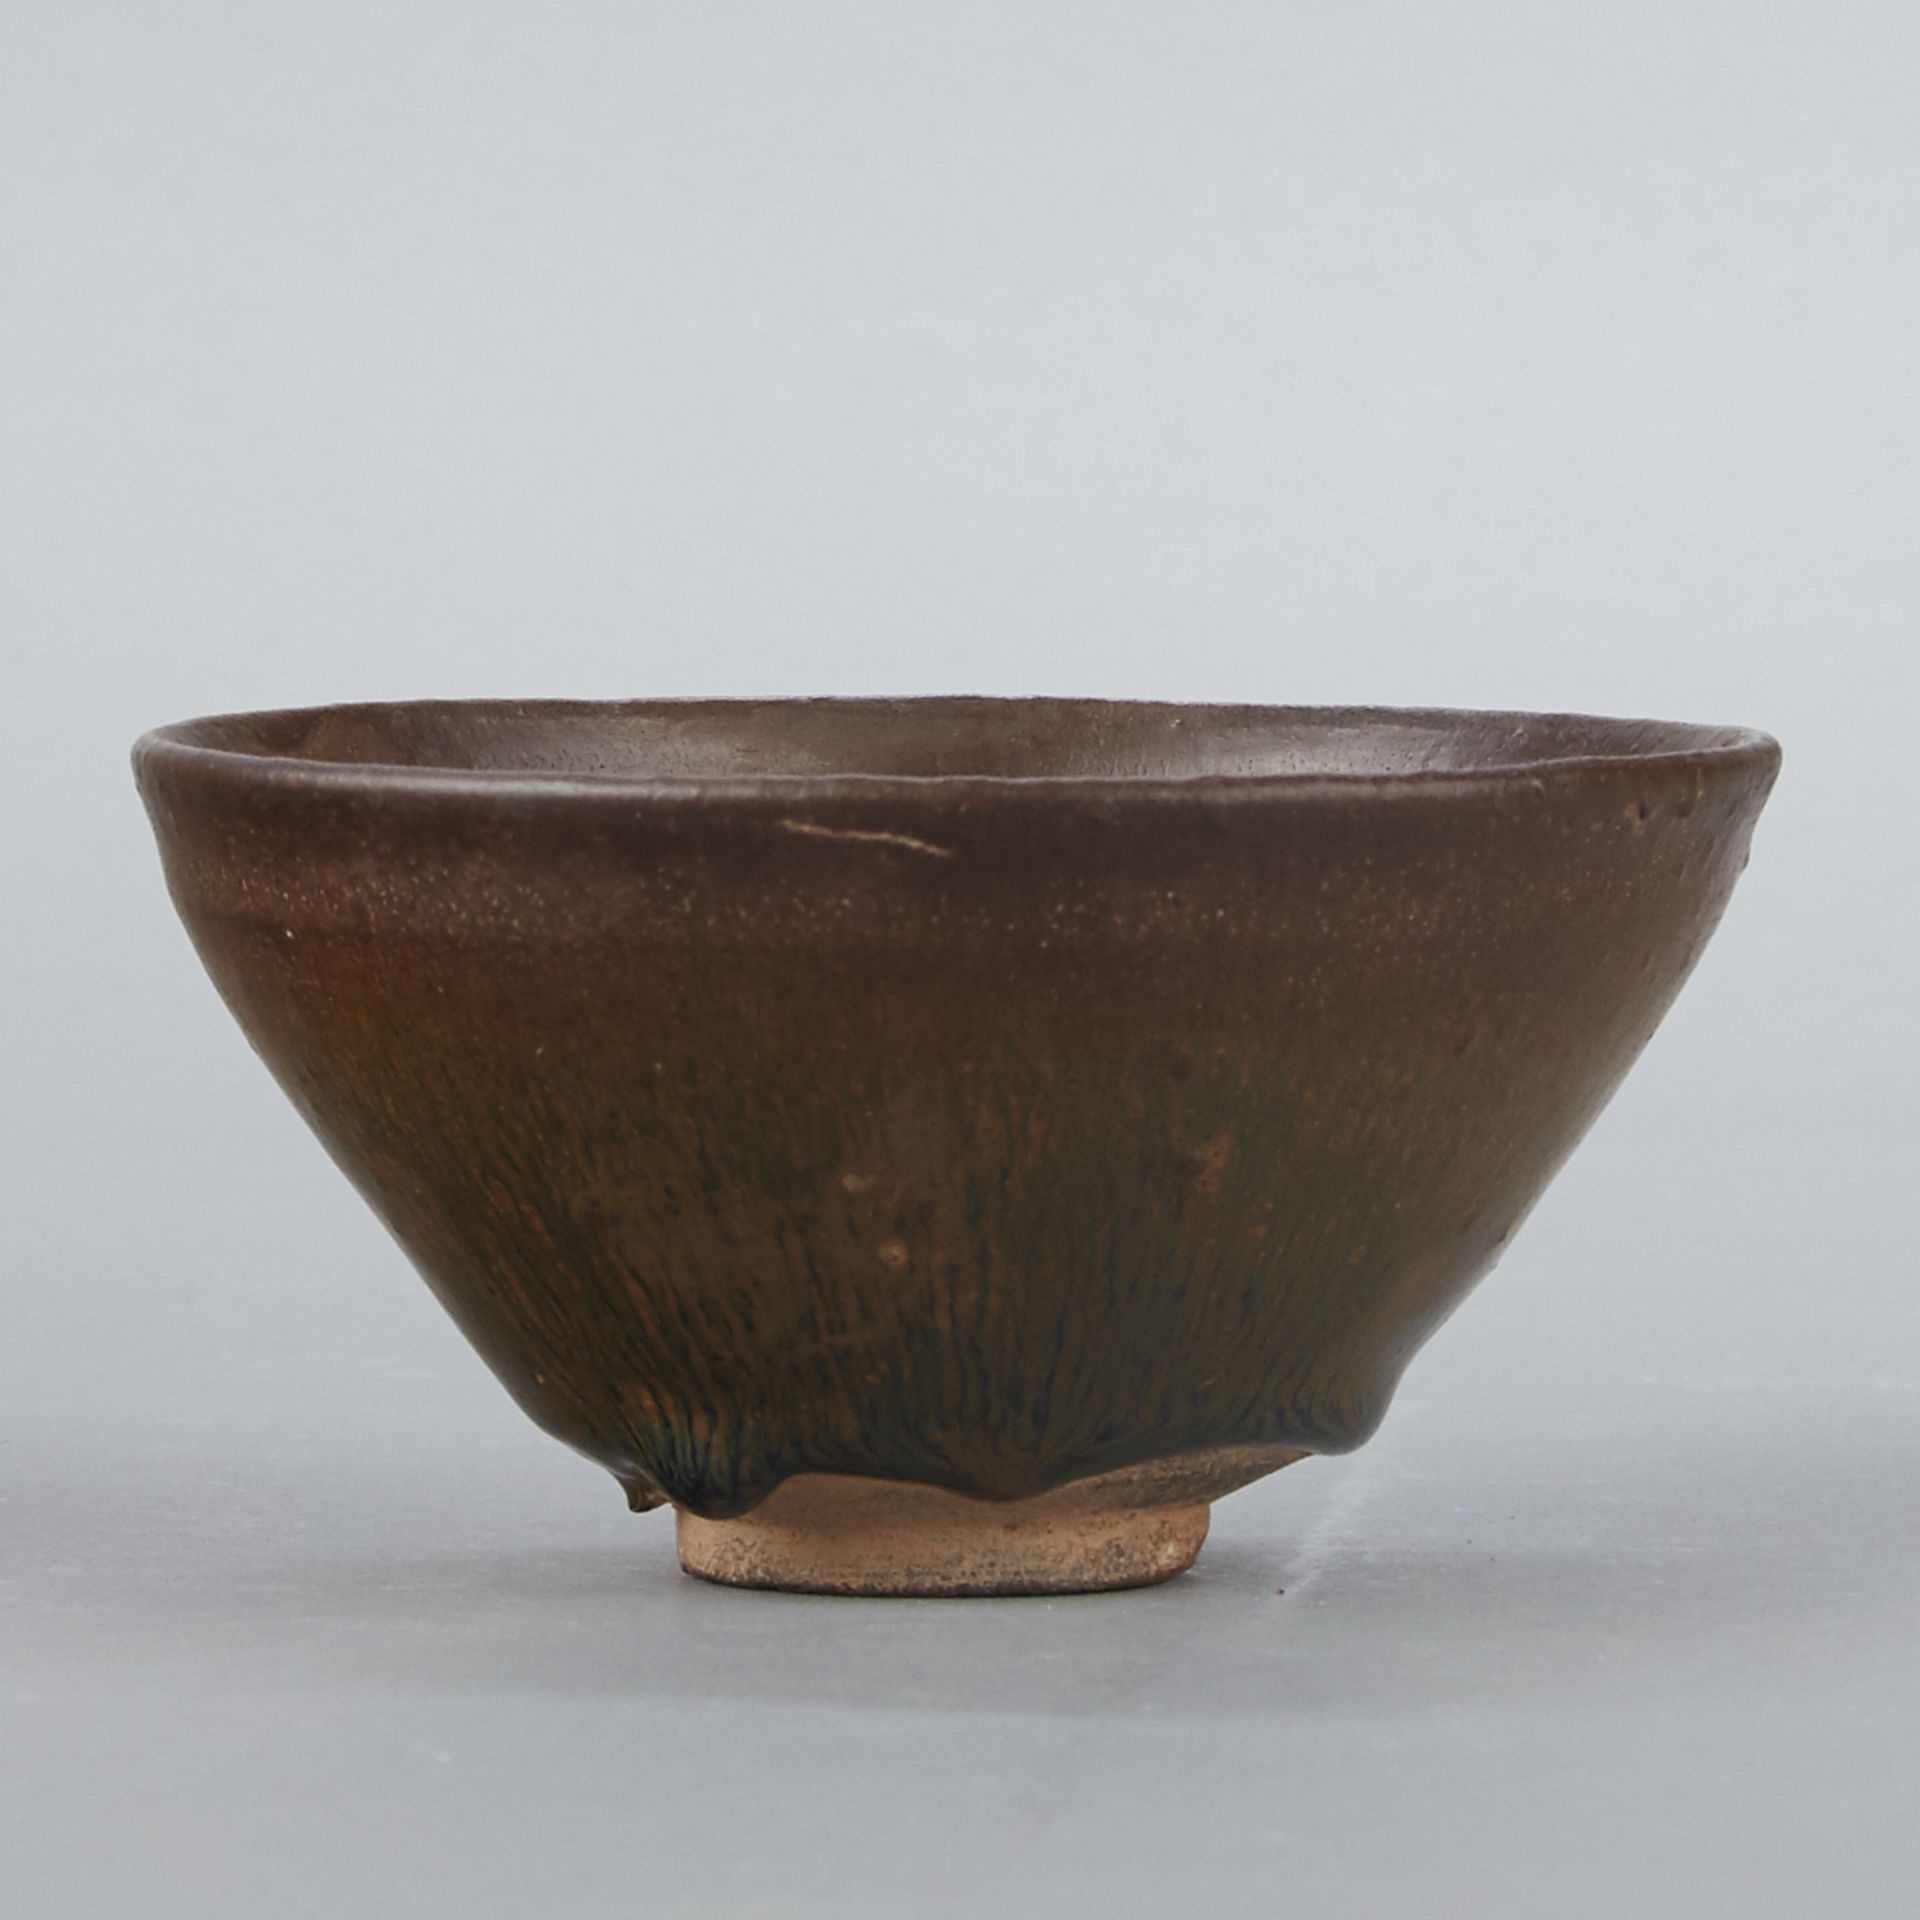 Early Chinese Jian Hare's Fur Bowl - Image 2 of 5